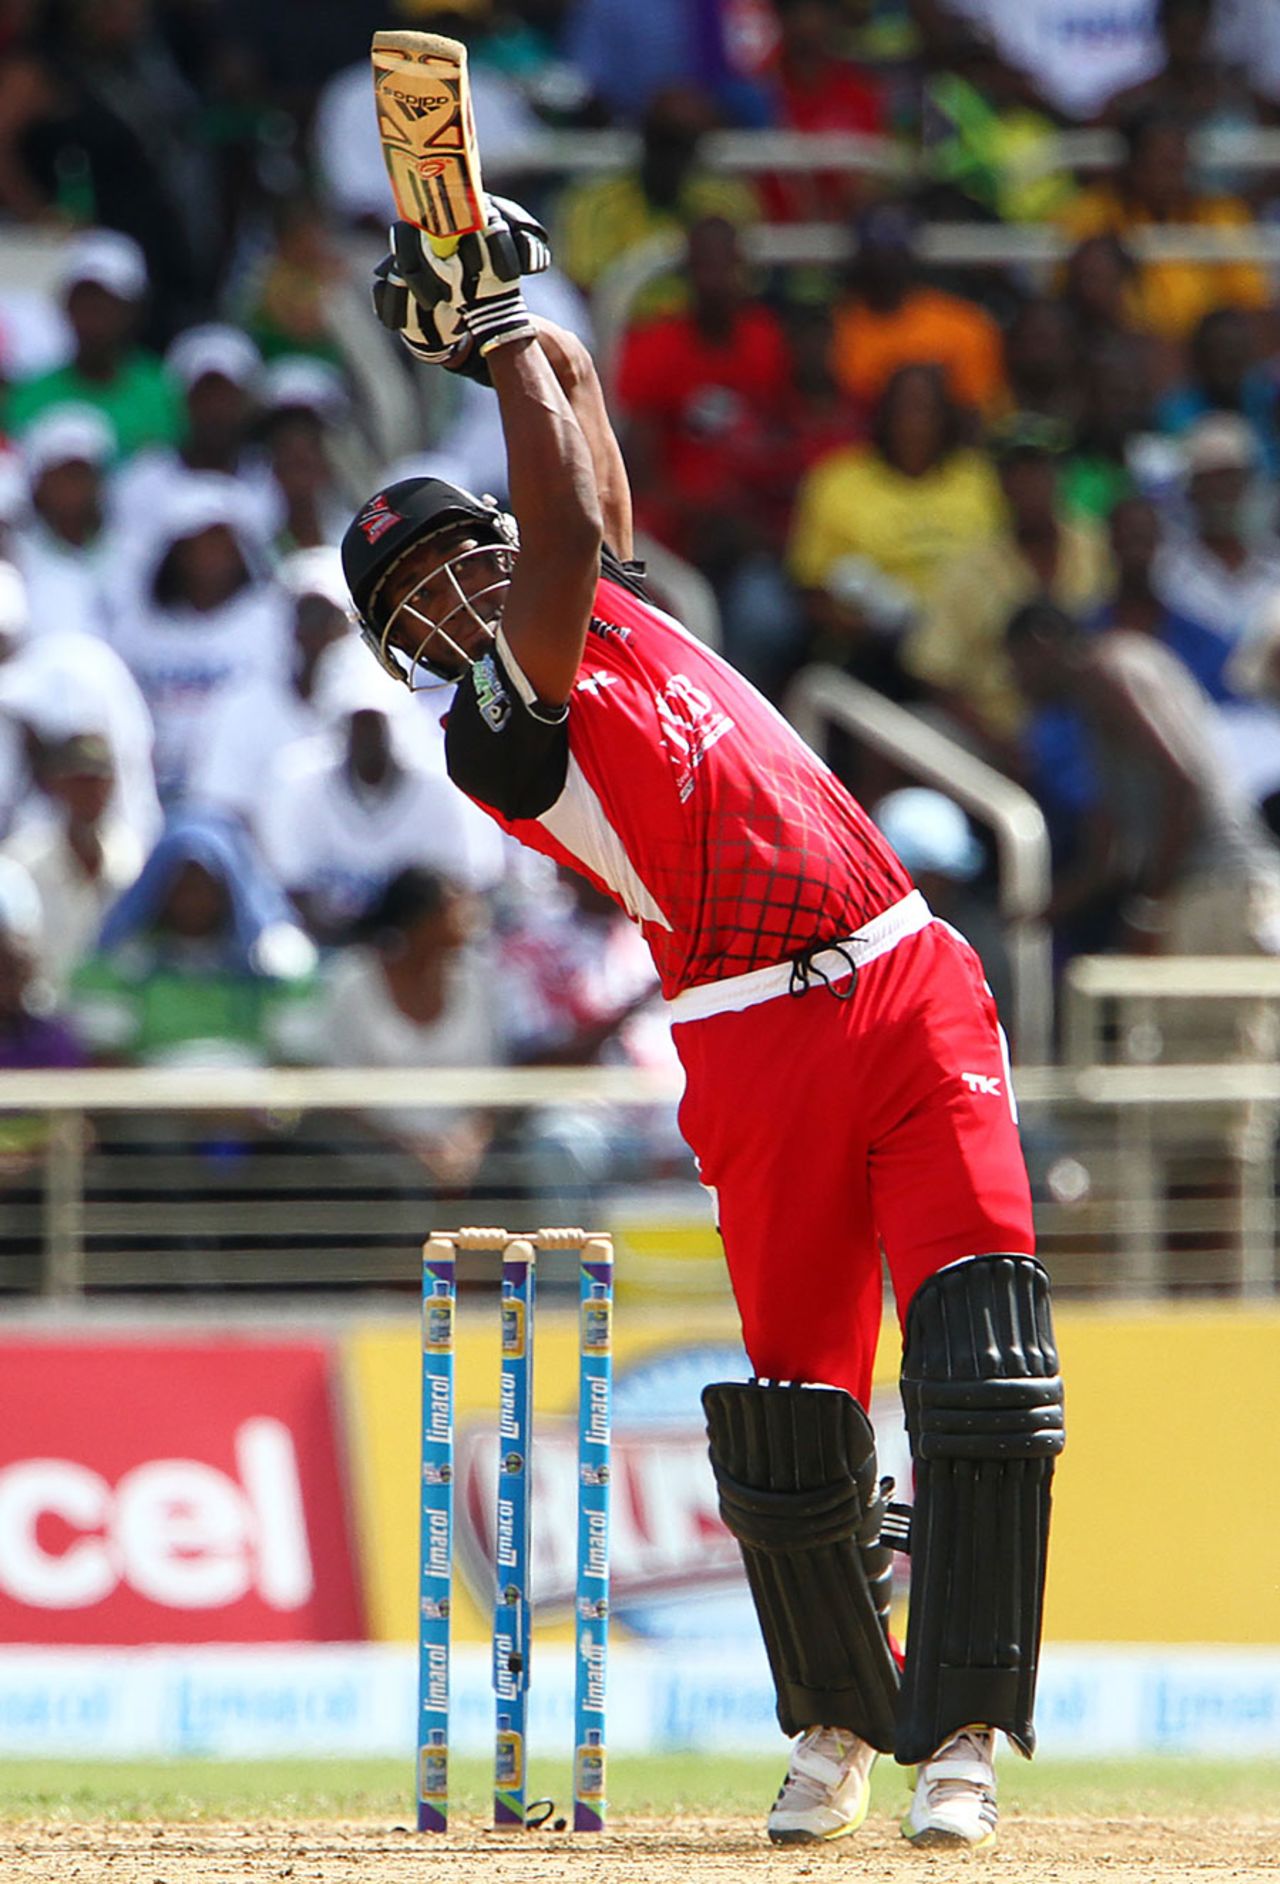 Dwayne Bravo launches over the straight boundary, Jamaica Tallawahs v Trinidad & Tobago Red Steel, Caribbean Premier League 2013, Kingston, August 18, 2013